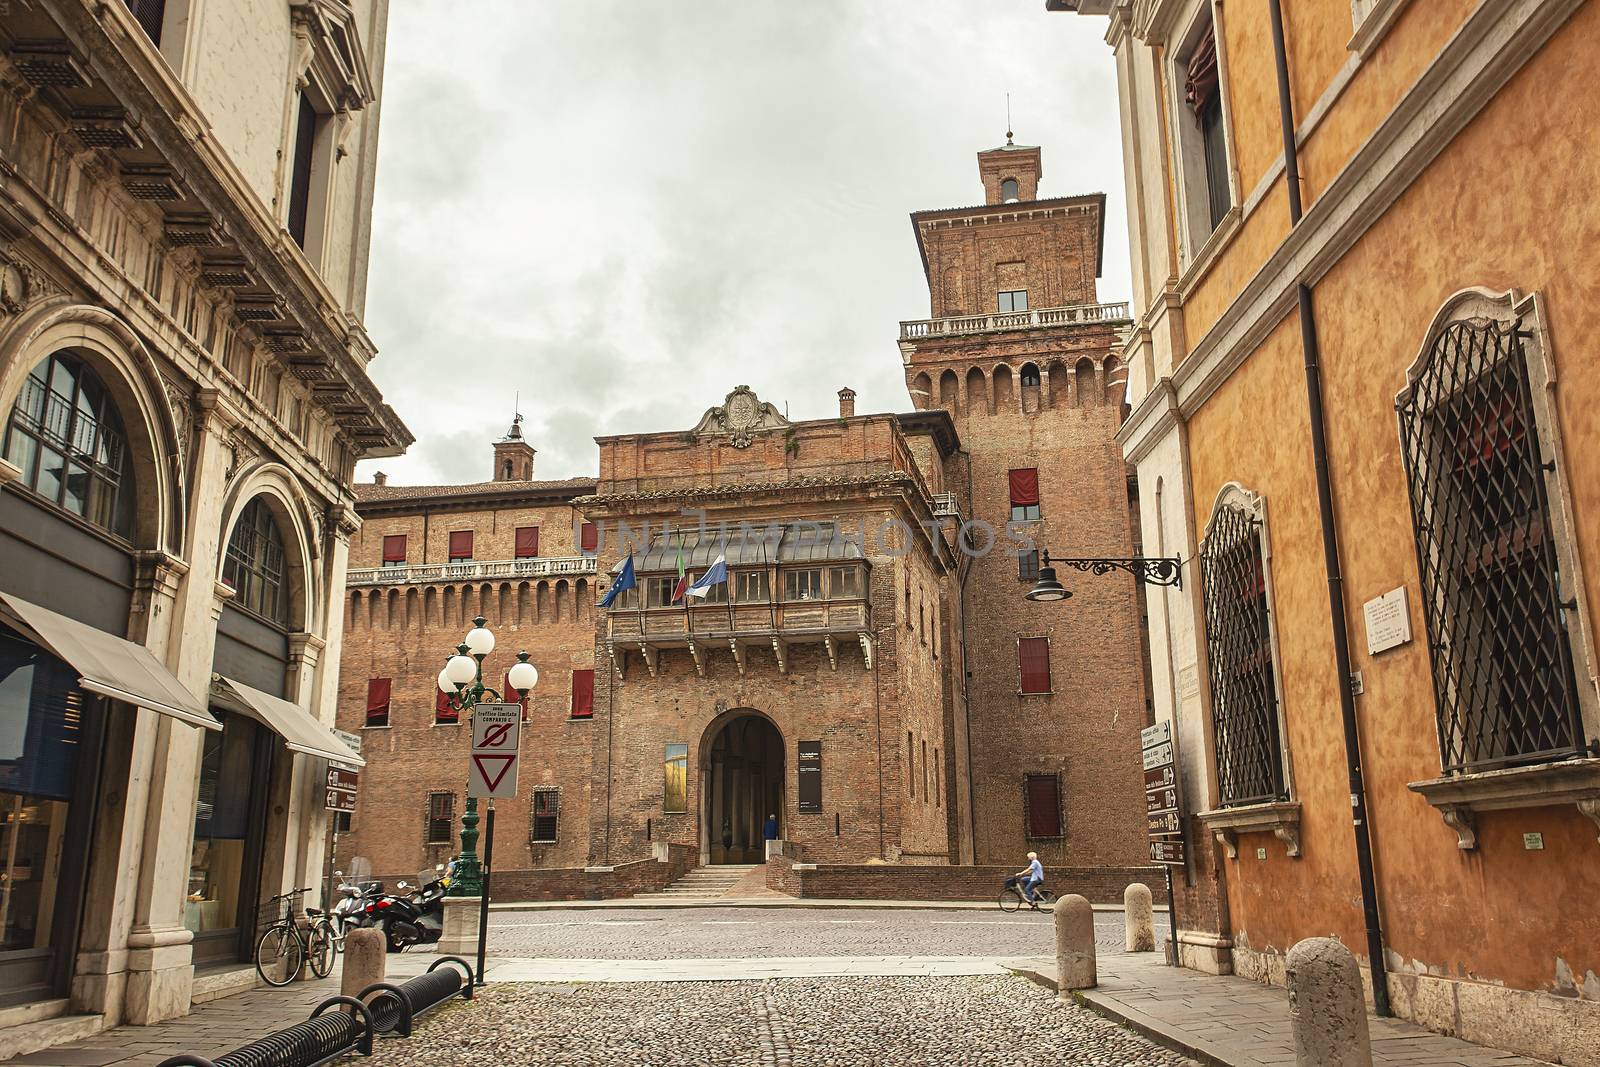 View of the castle of Ferrara from the street in front of it by pippocarlot